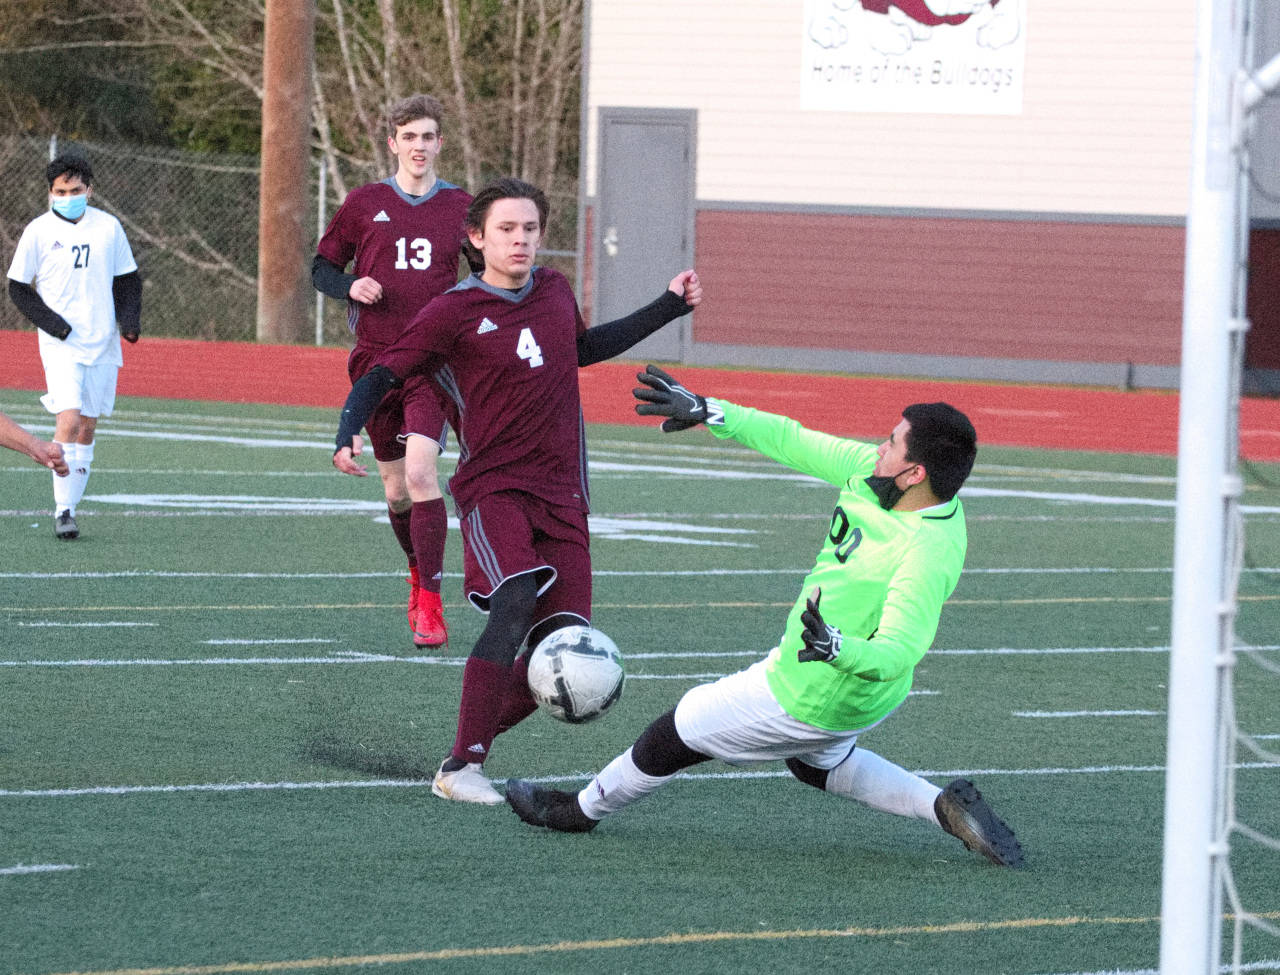 Montesano’s Veli Ambrocio (4) puts a shot past Raymond-South Bend goal keeper Oscar Juarez for his second goal of the game and a three-goal lead in Monte’s 3-1 win on Monday at Jack Rottle Field in Montesano. (Ryan Sparks | The Daily World)